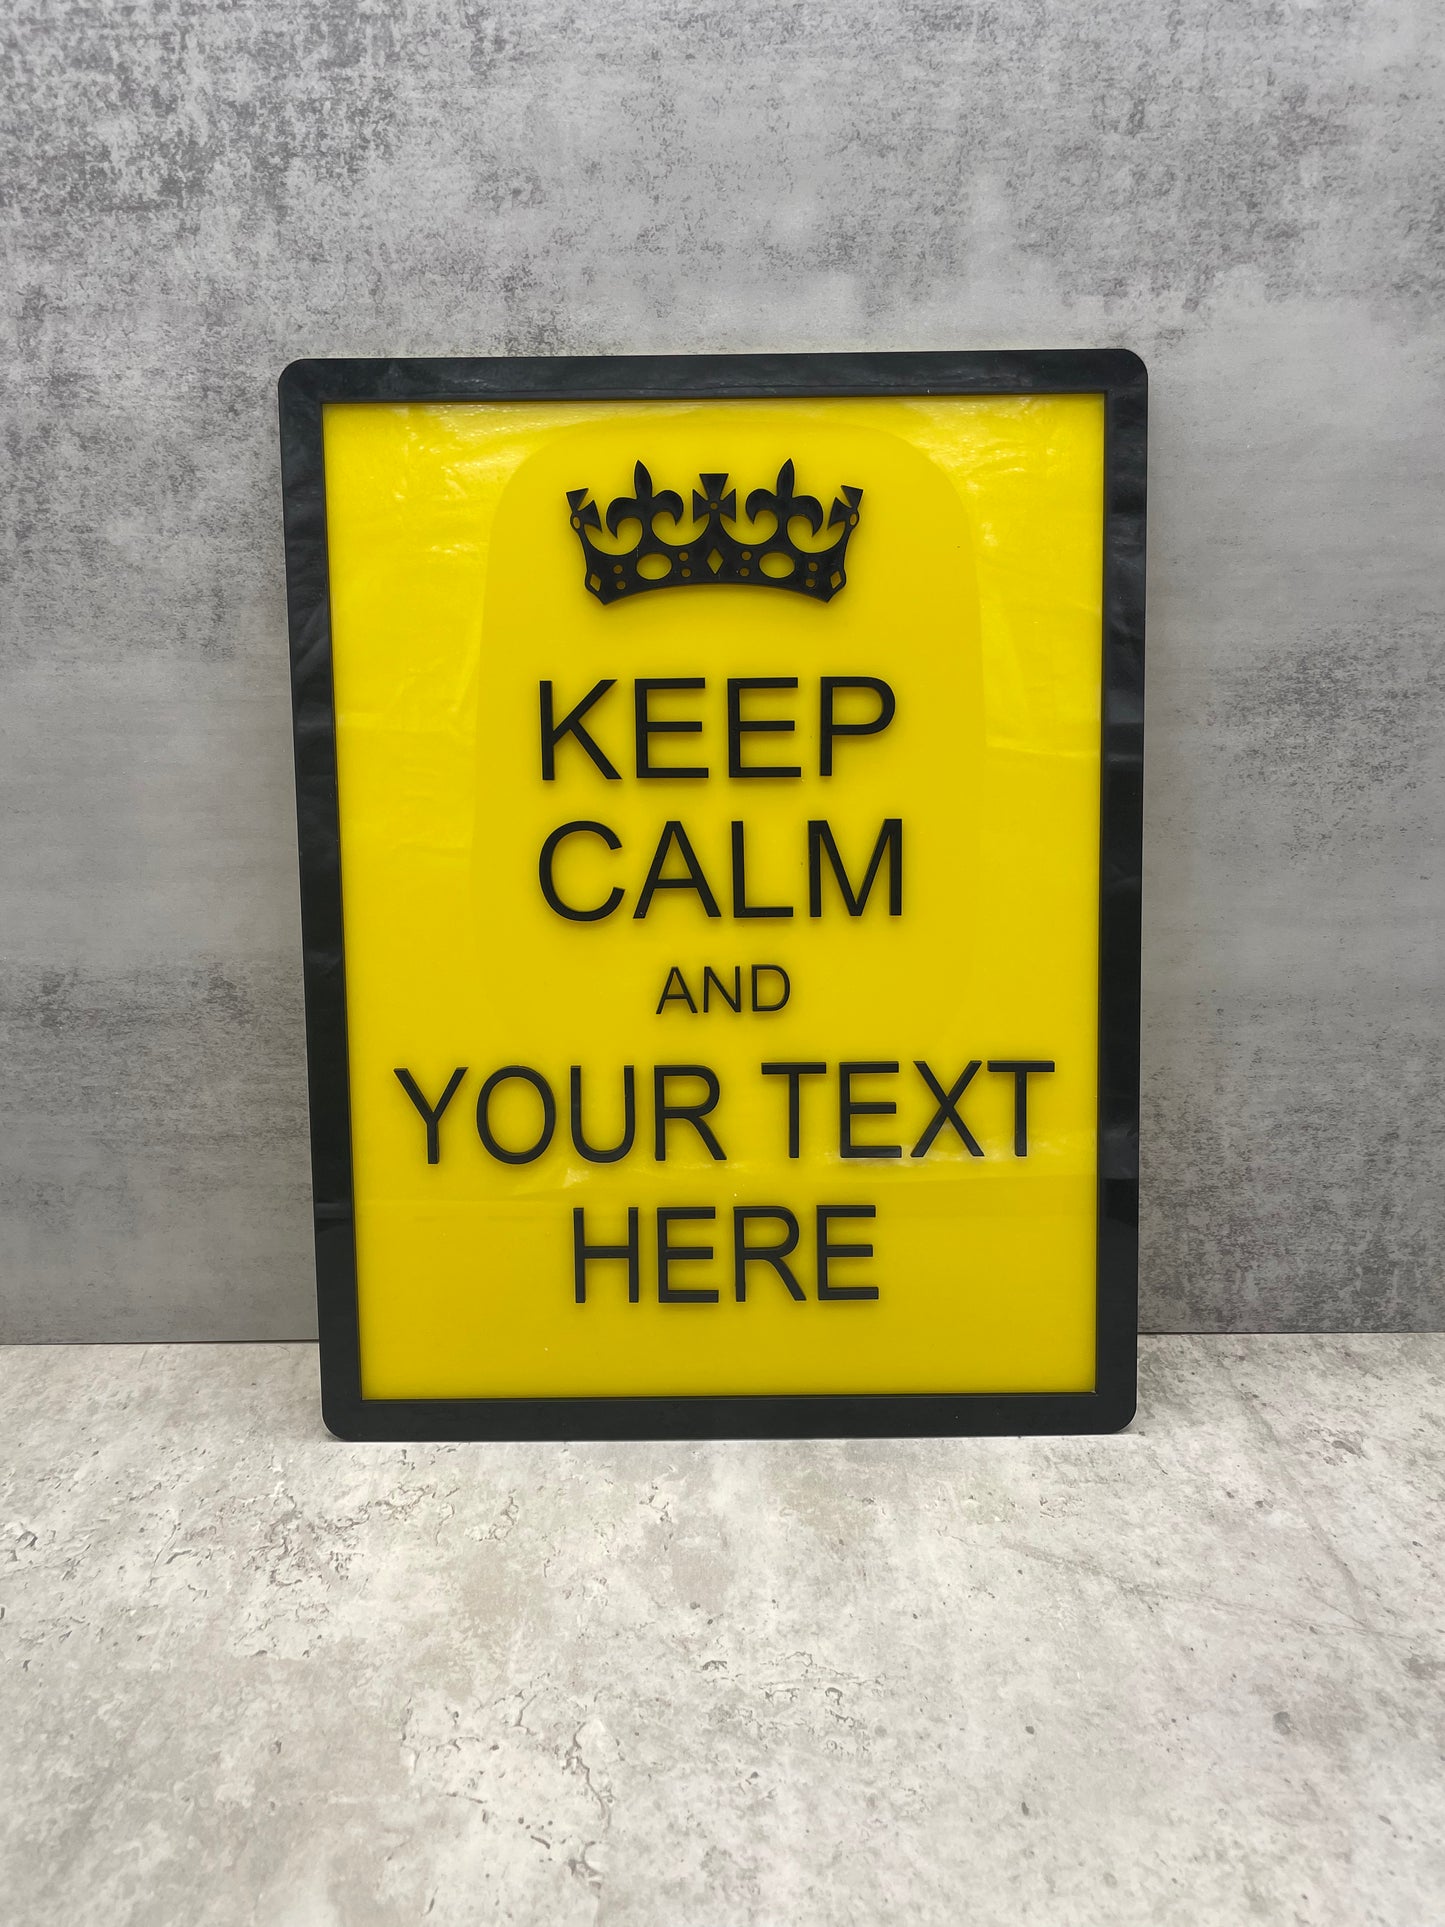 keep calm and carry on custom sign in yellow and black